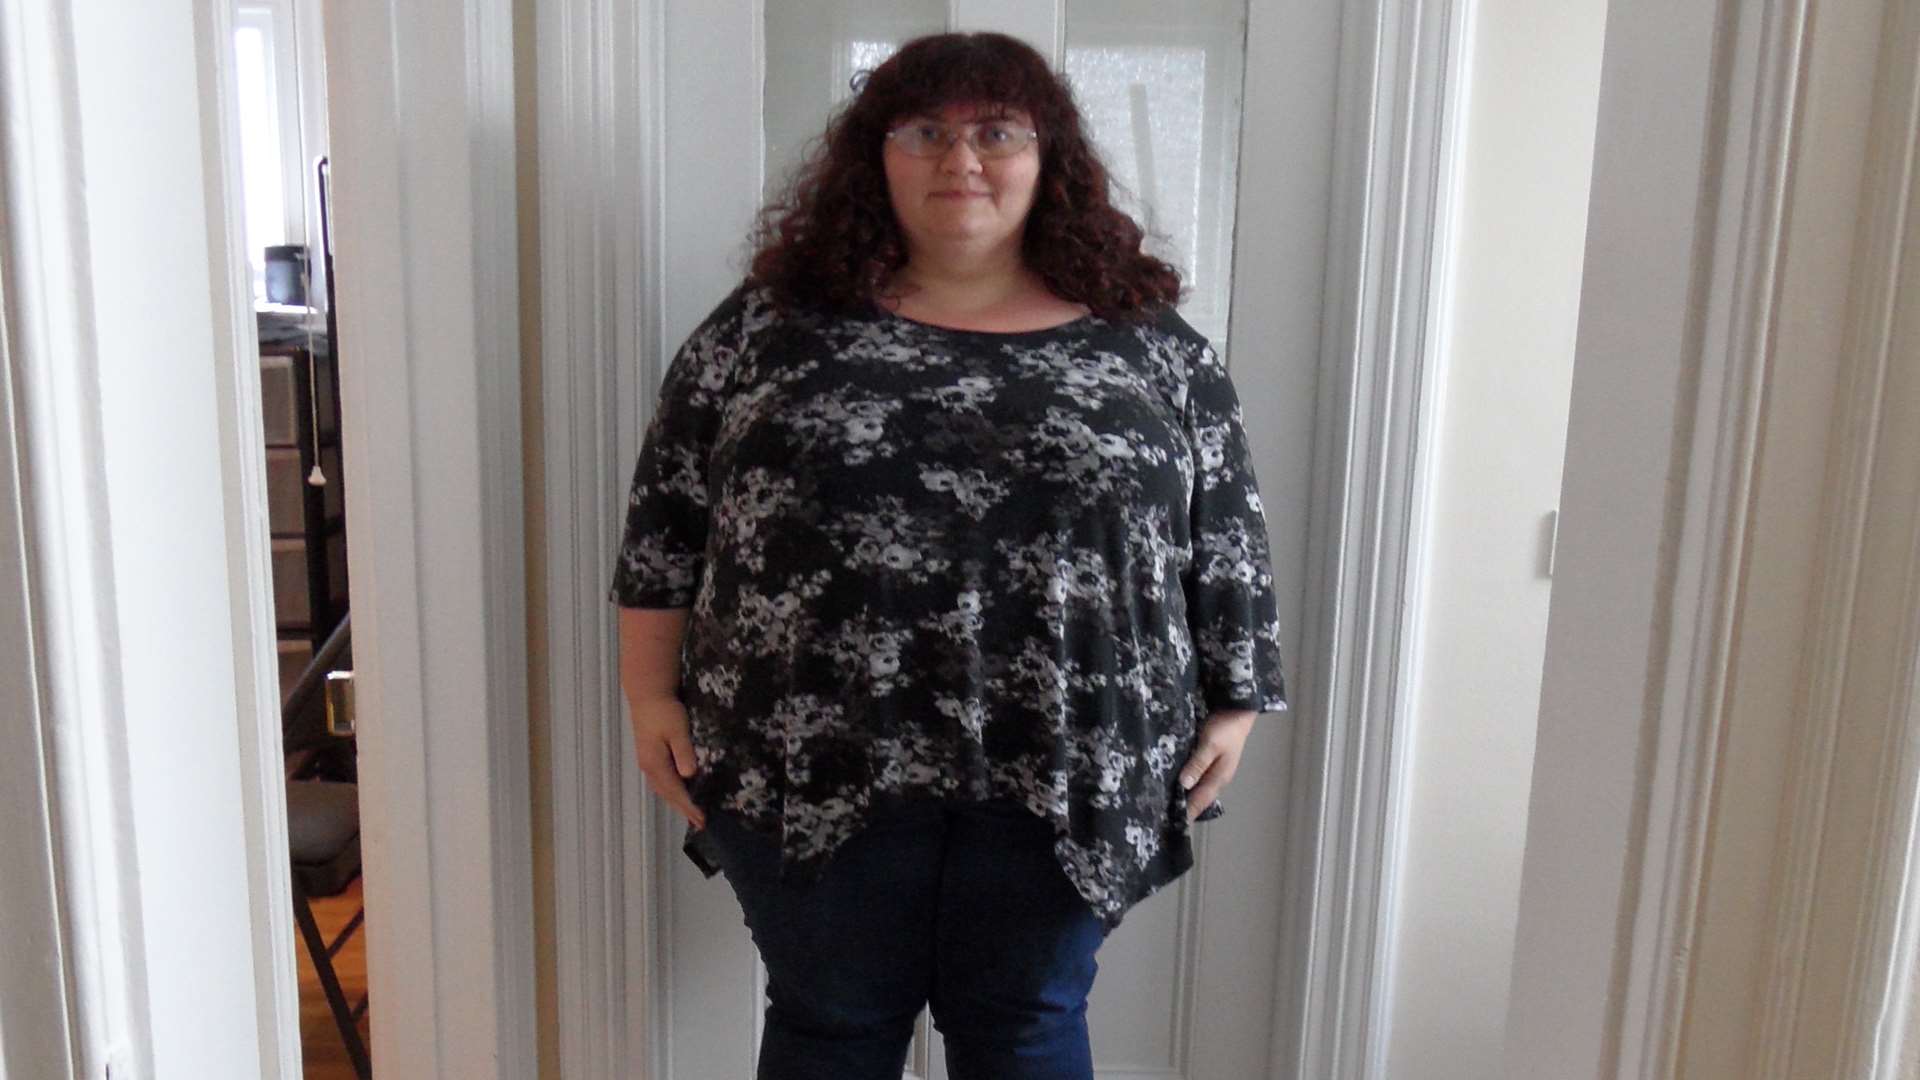 Delpha went from size 28 to size 12.